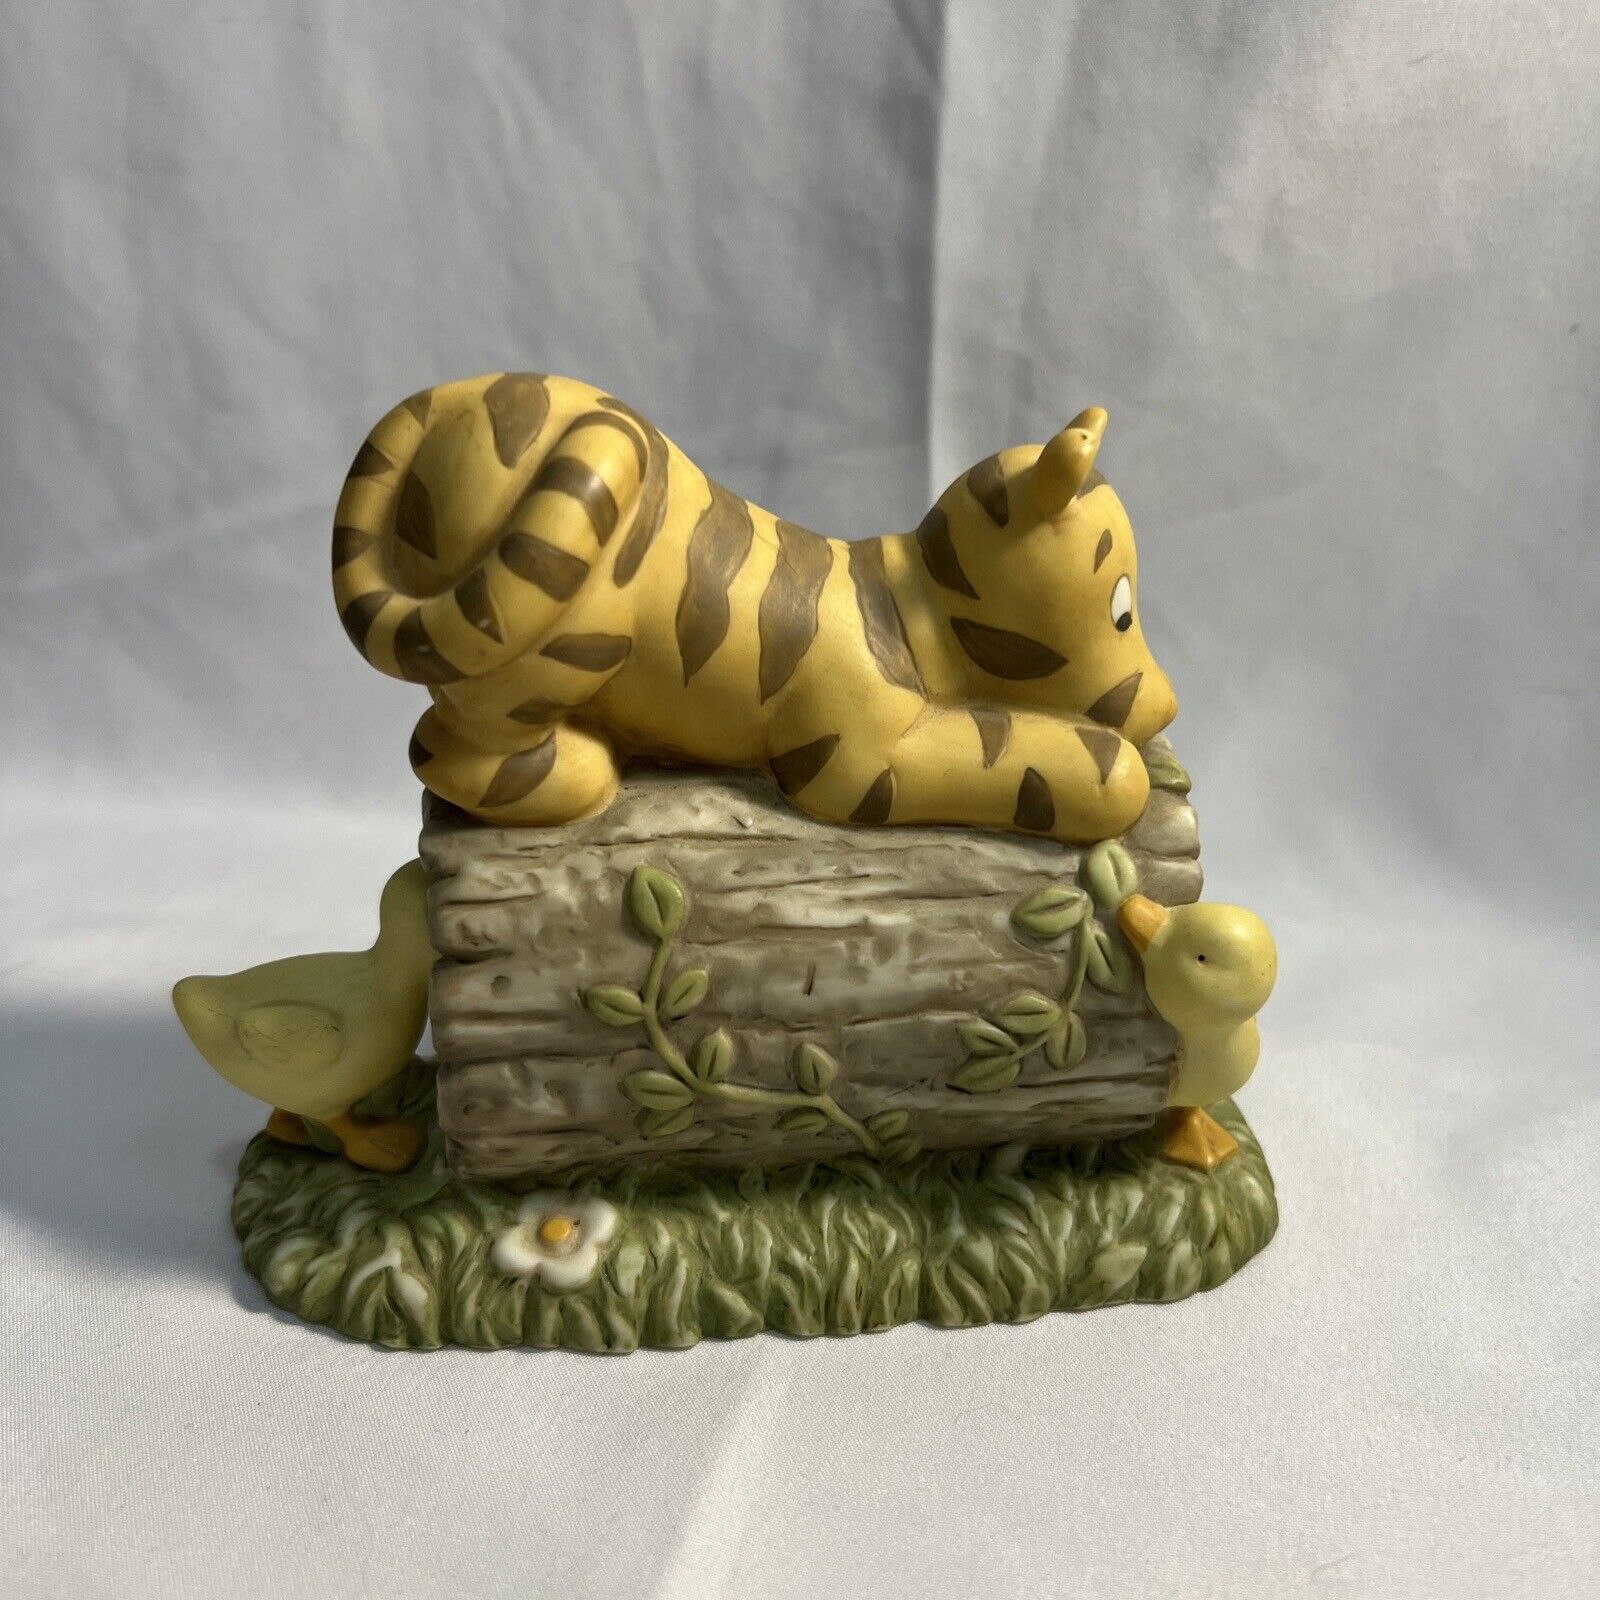 Disney Pooh’s Little Friends Tigger Ceramic Night Light Cover Only Michel & Co